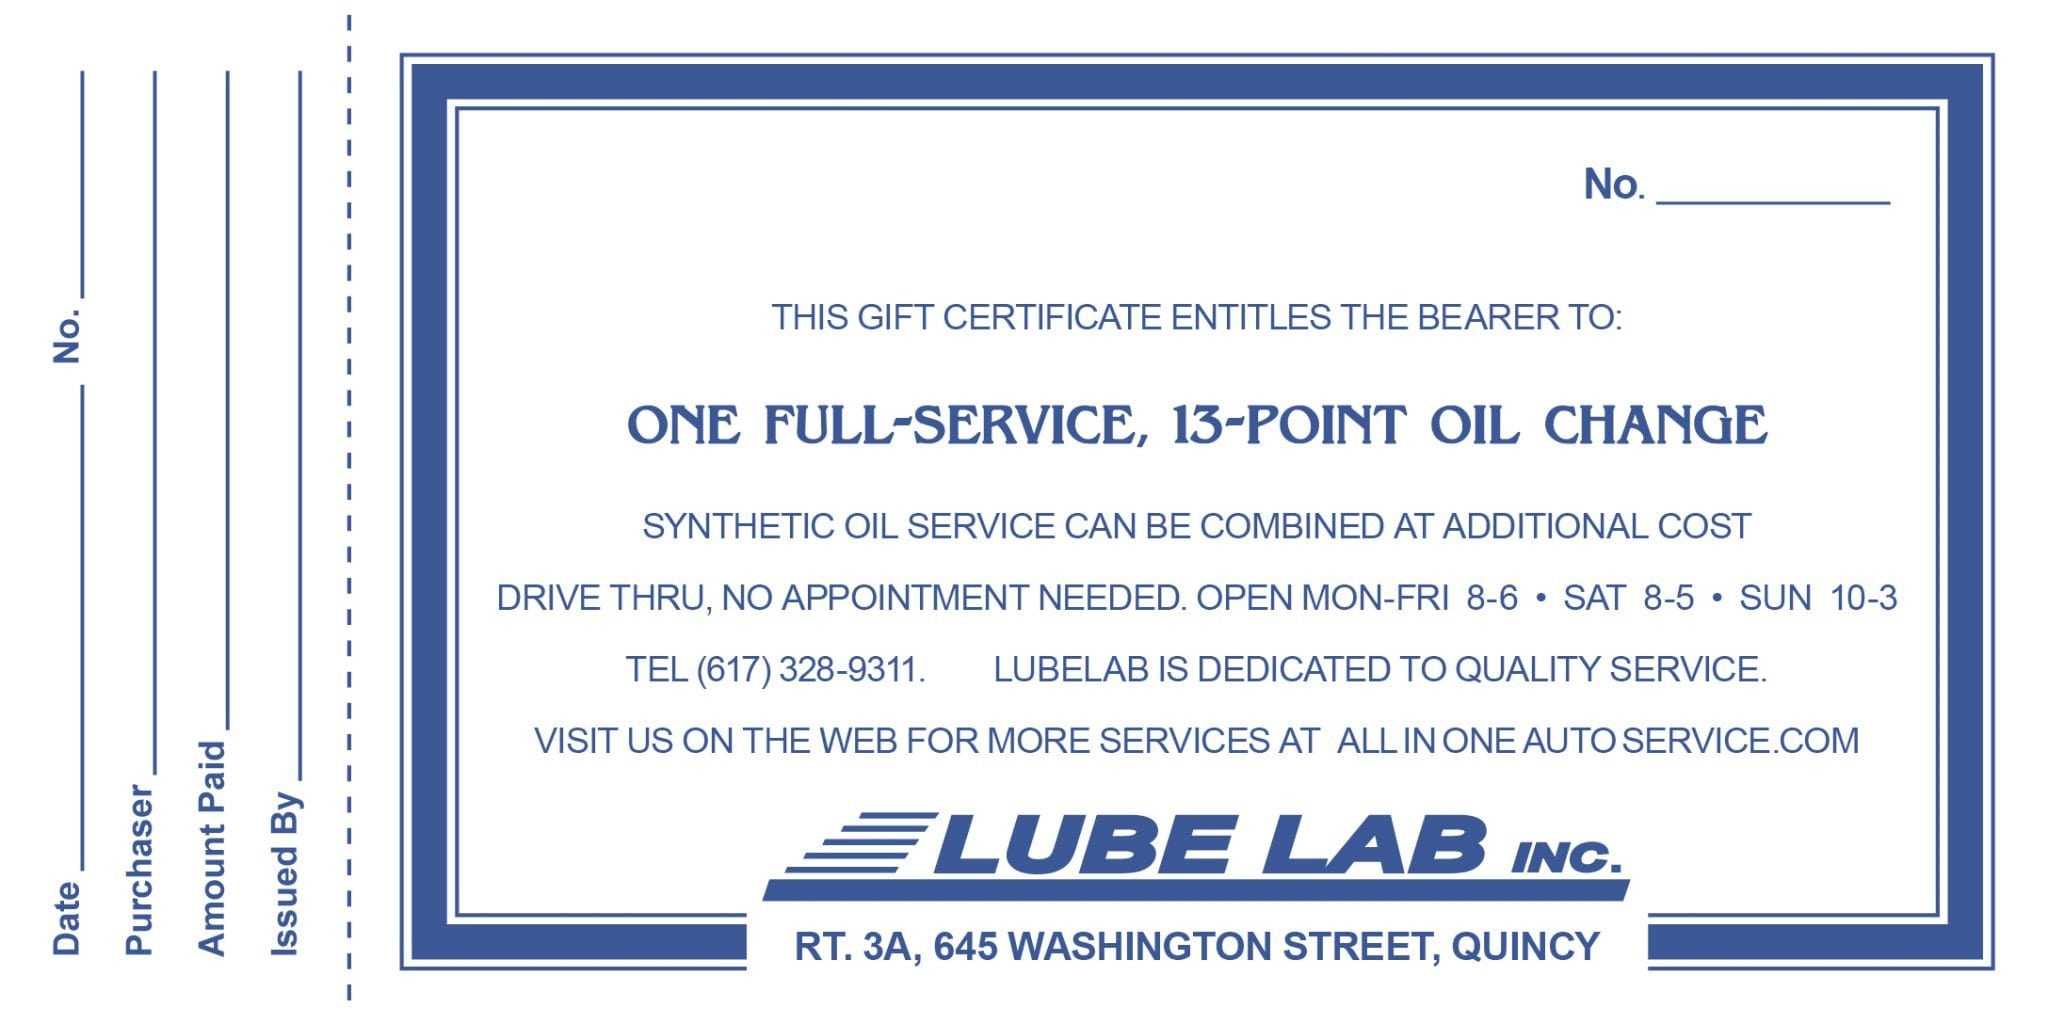 Full Service, 13 Point Oil Change | All In One & Lube Lab Intended For This Certificate Entitles The Bearer Template